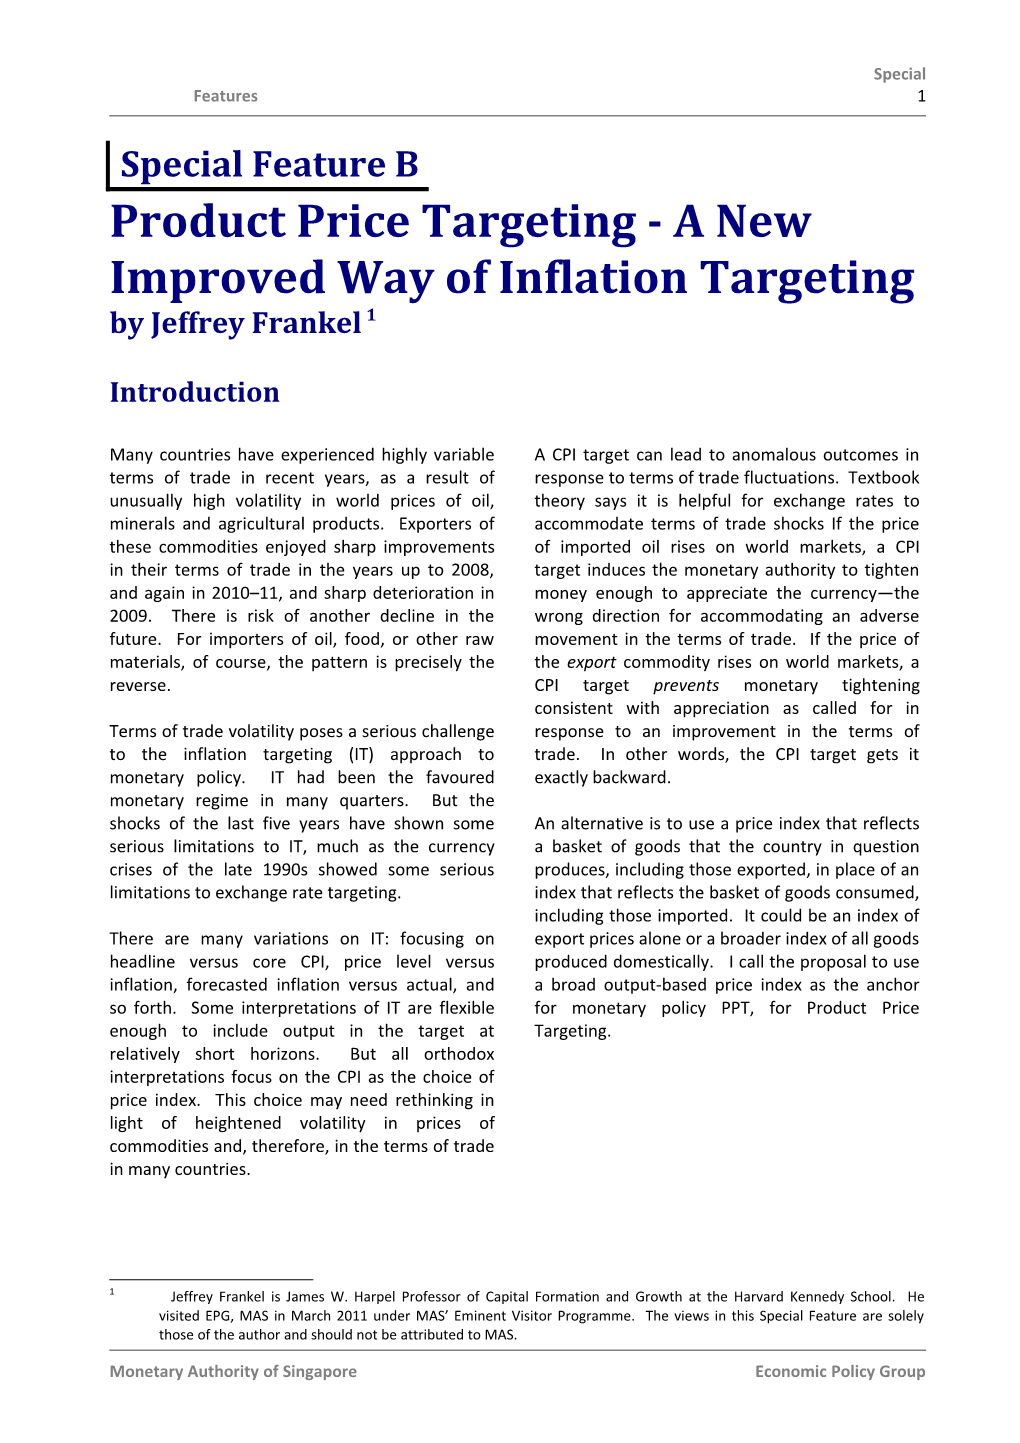 Product Price Targeting - a New Improved Way of Inflation Targeting